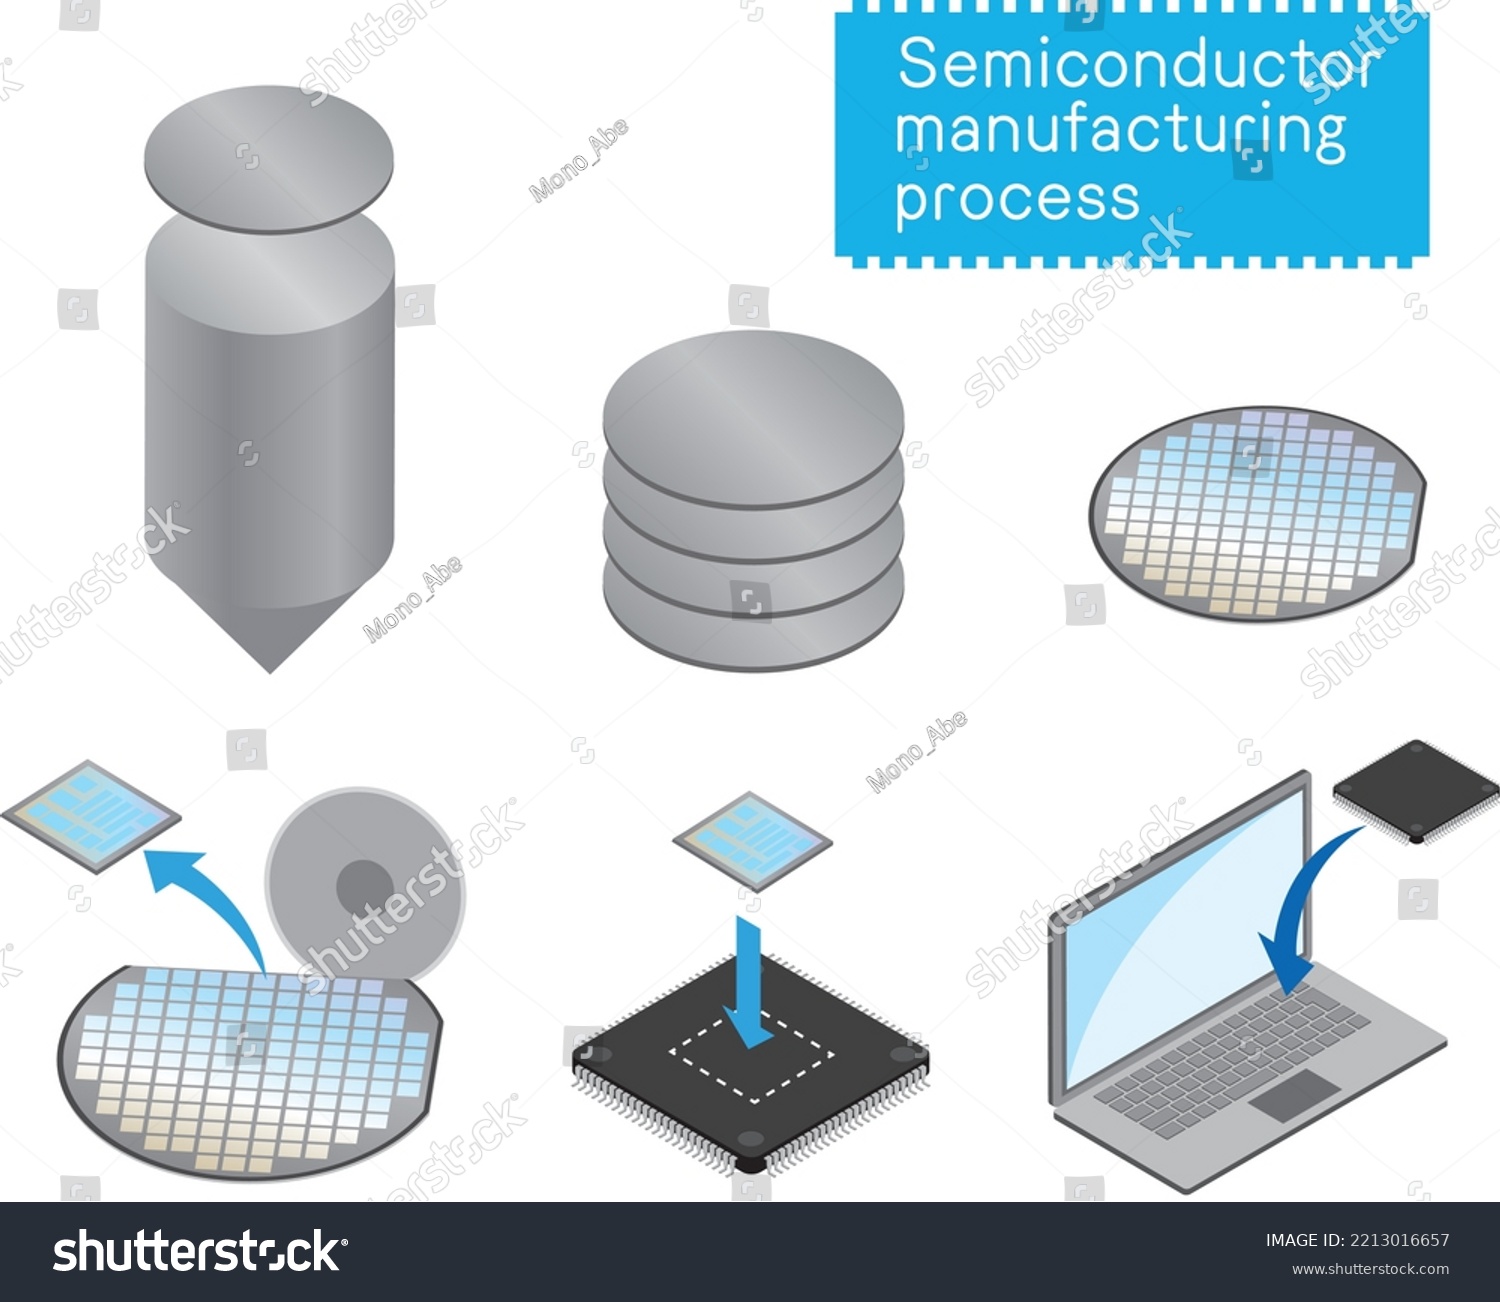 SVG of illustration of semiconductor manufacturing process svg